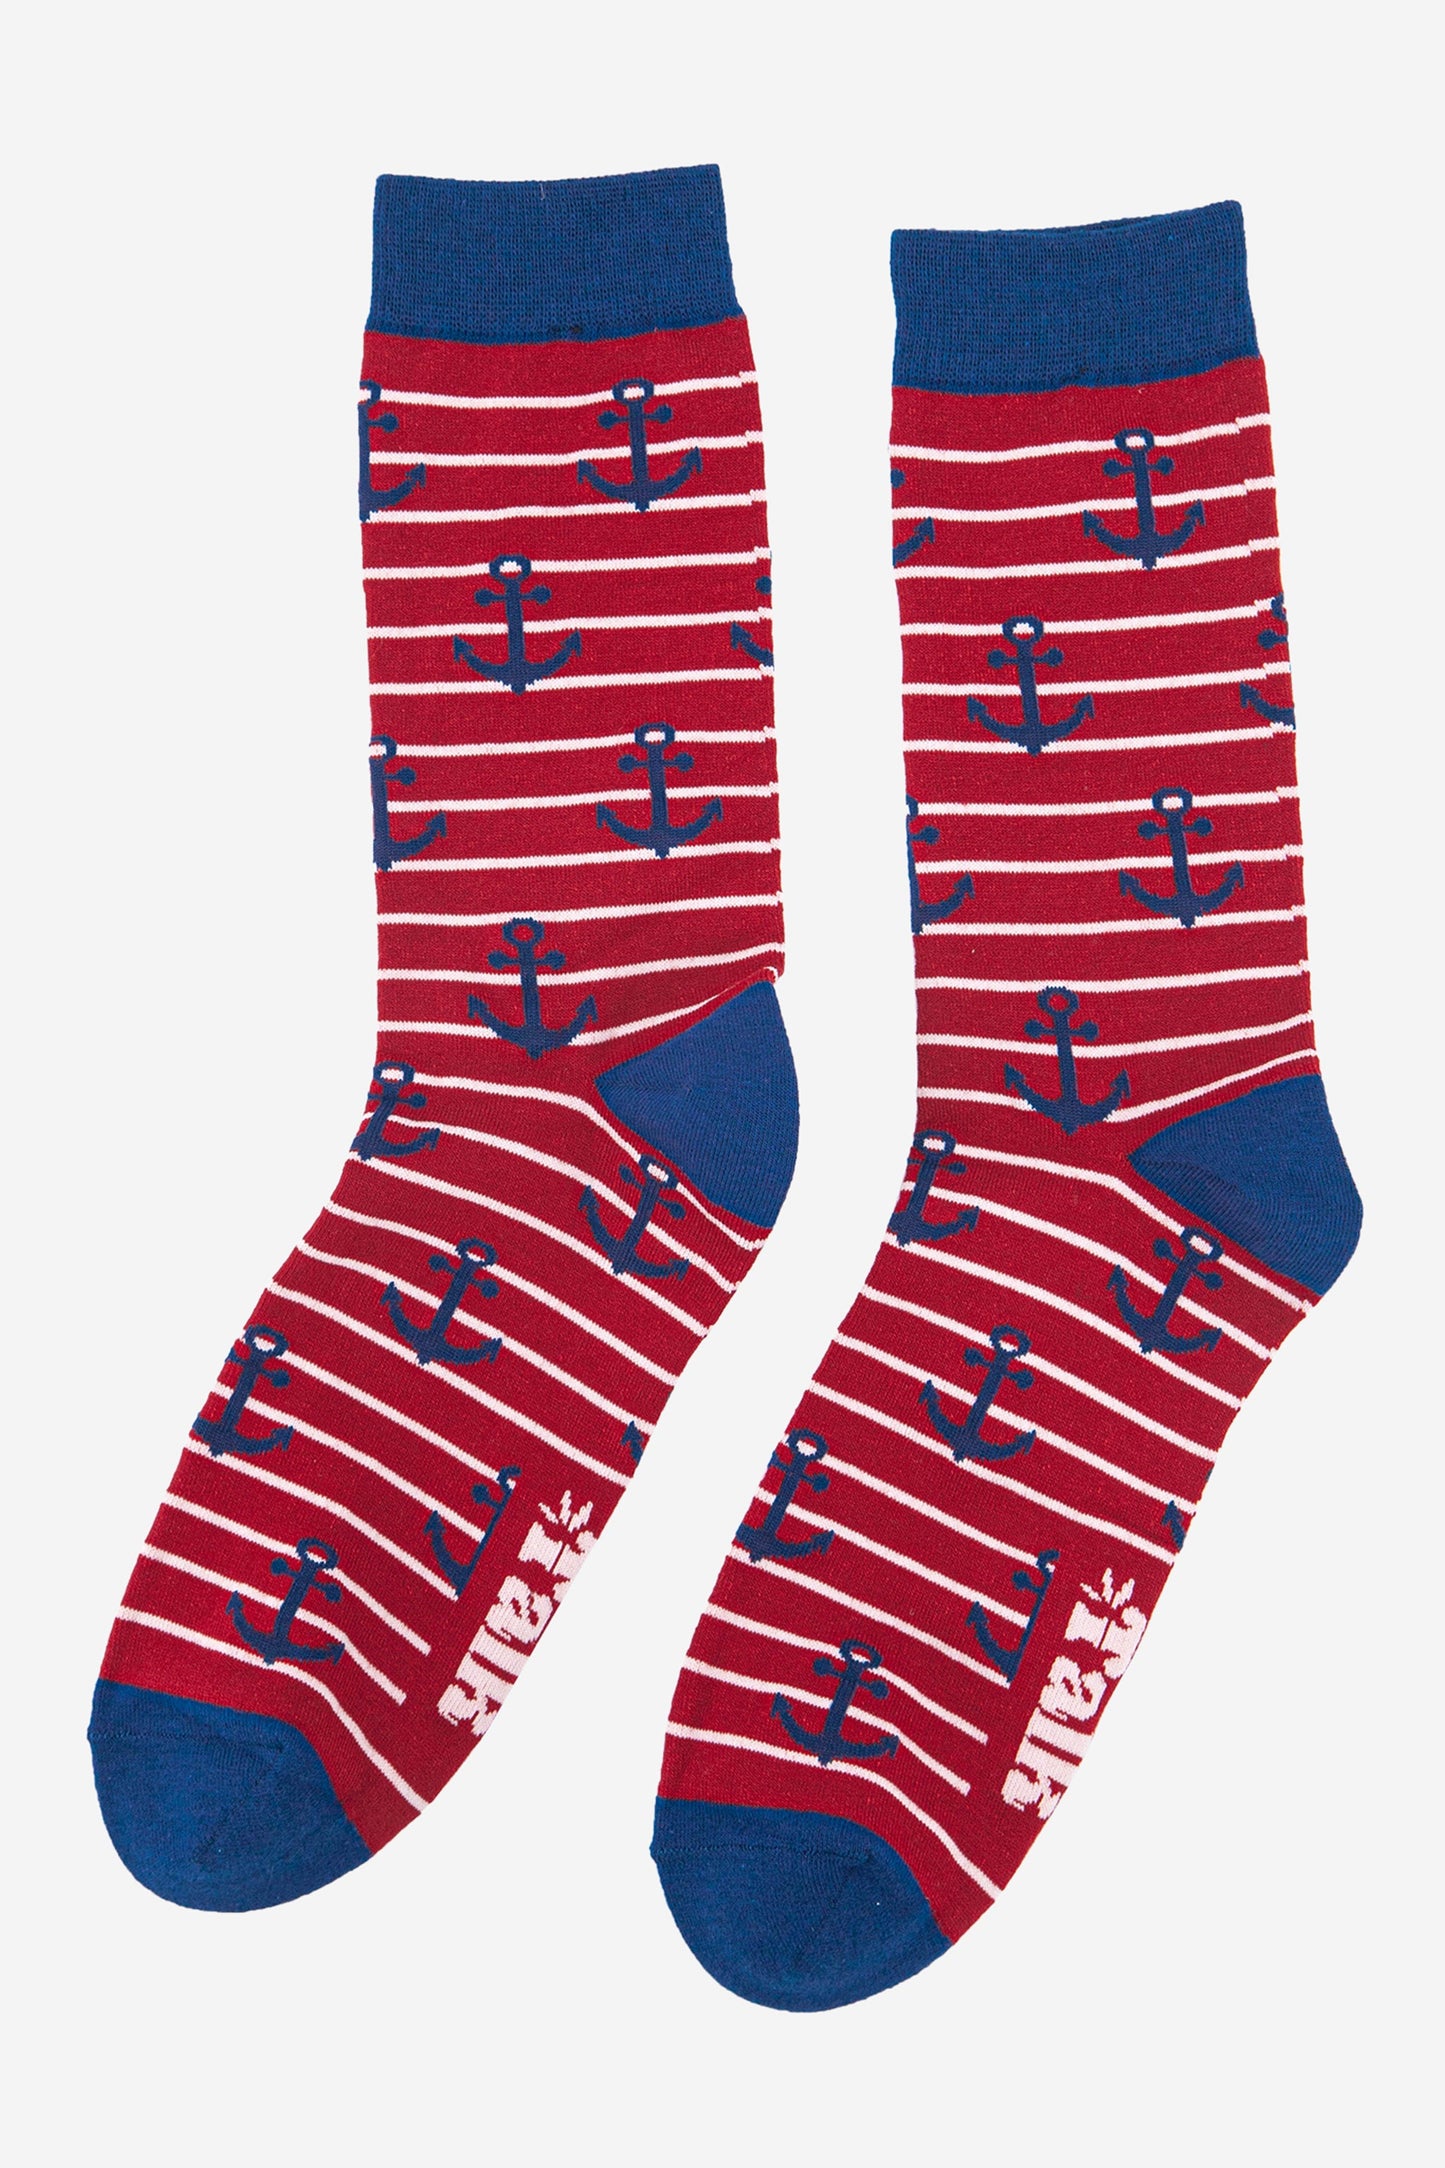 red and white striped socks with a blue anchor pattern and blue, heel, toe and cuff